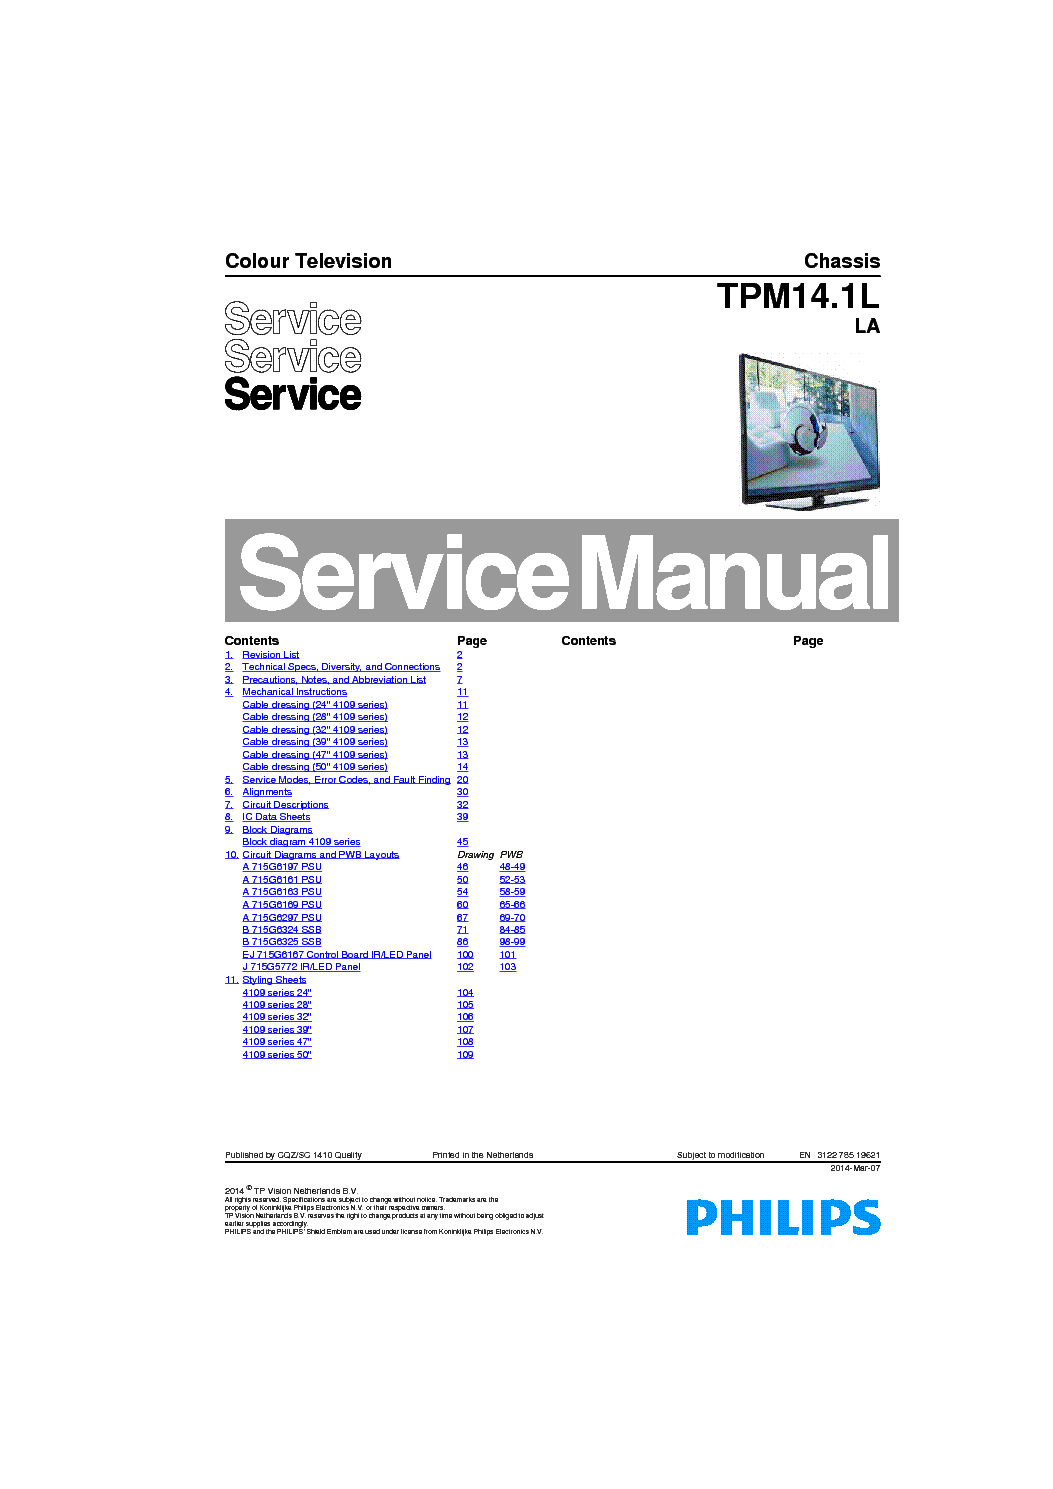 PHILIPS TPM14.1LLA 312278519621 service manual (1st page)